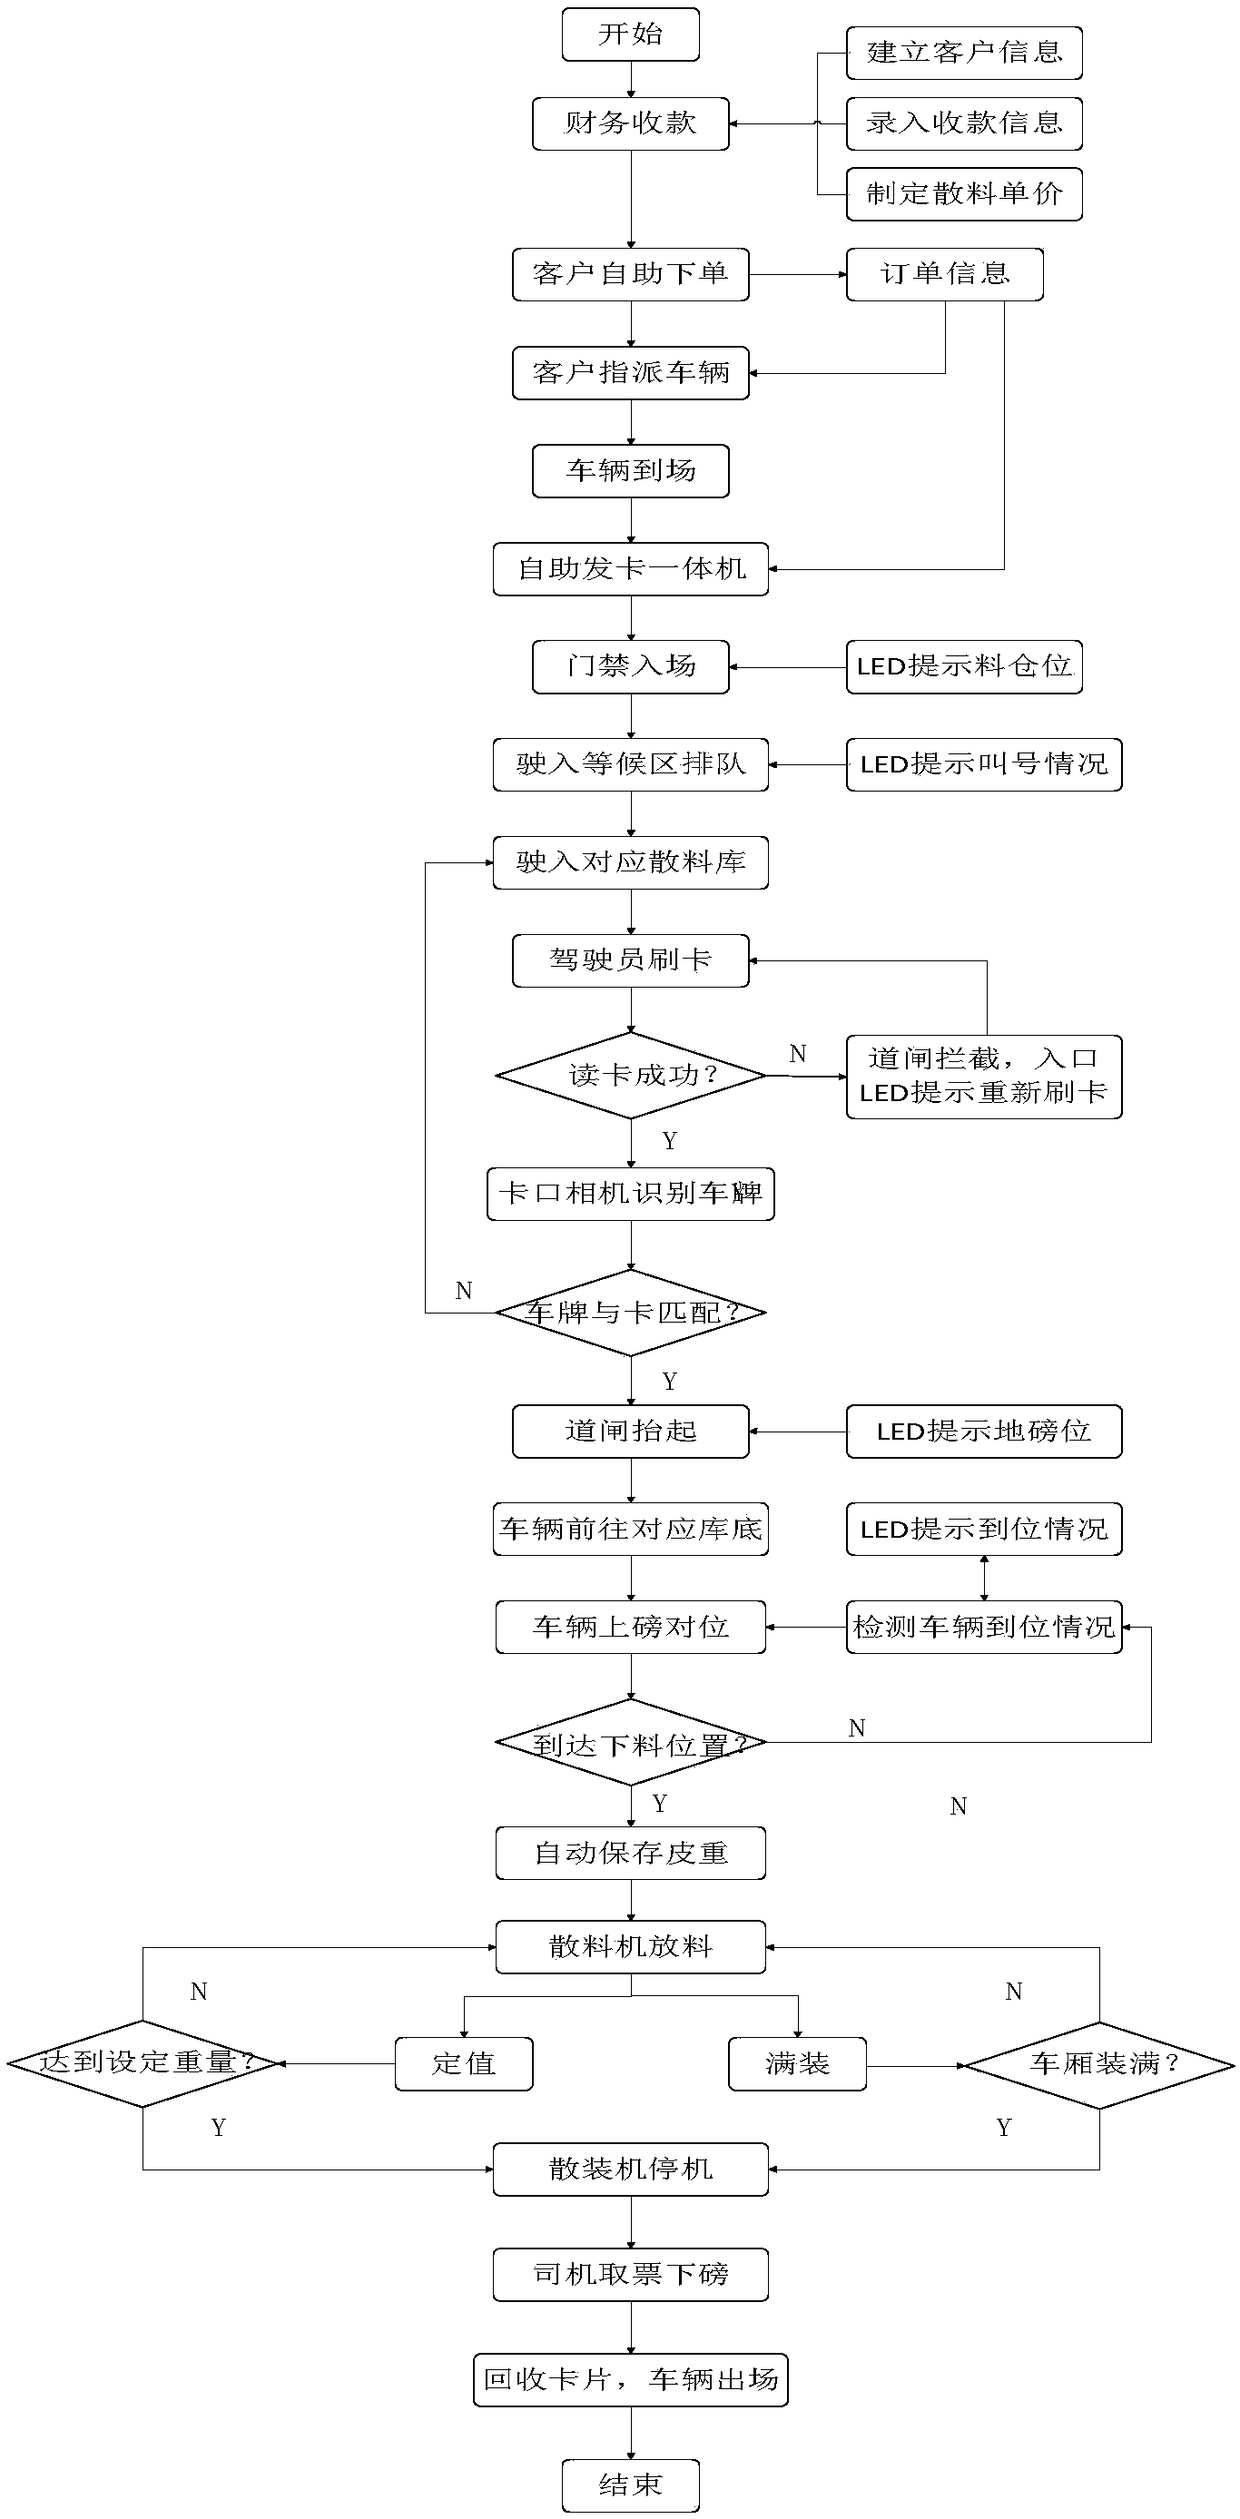 A delivery management system and method